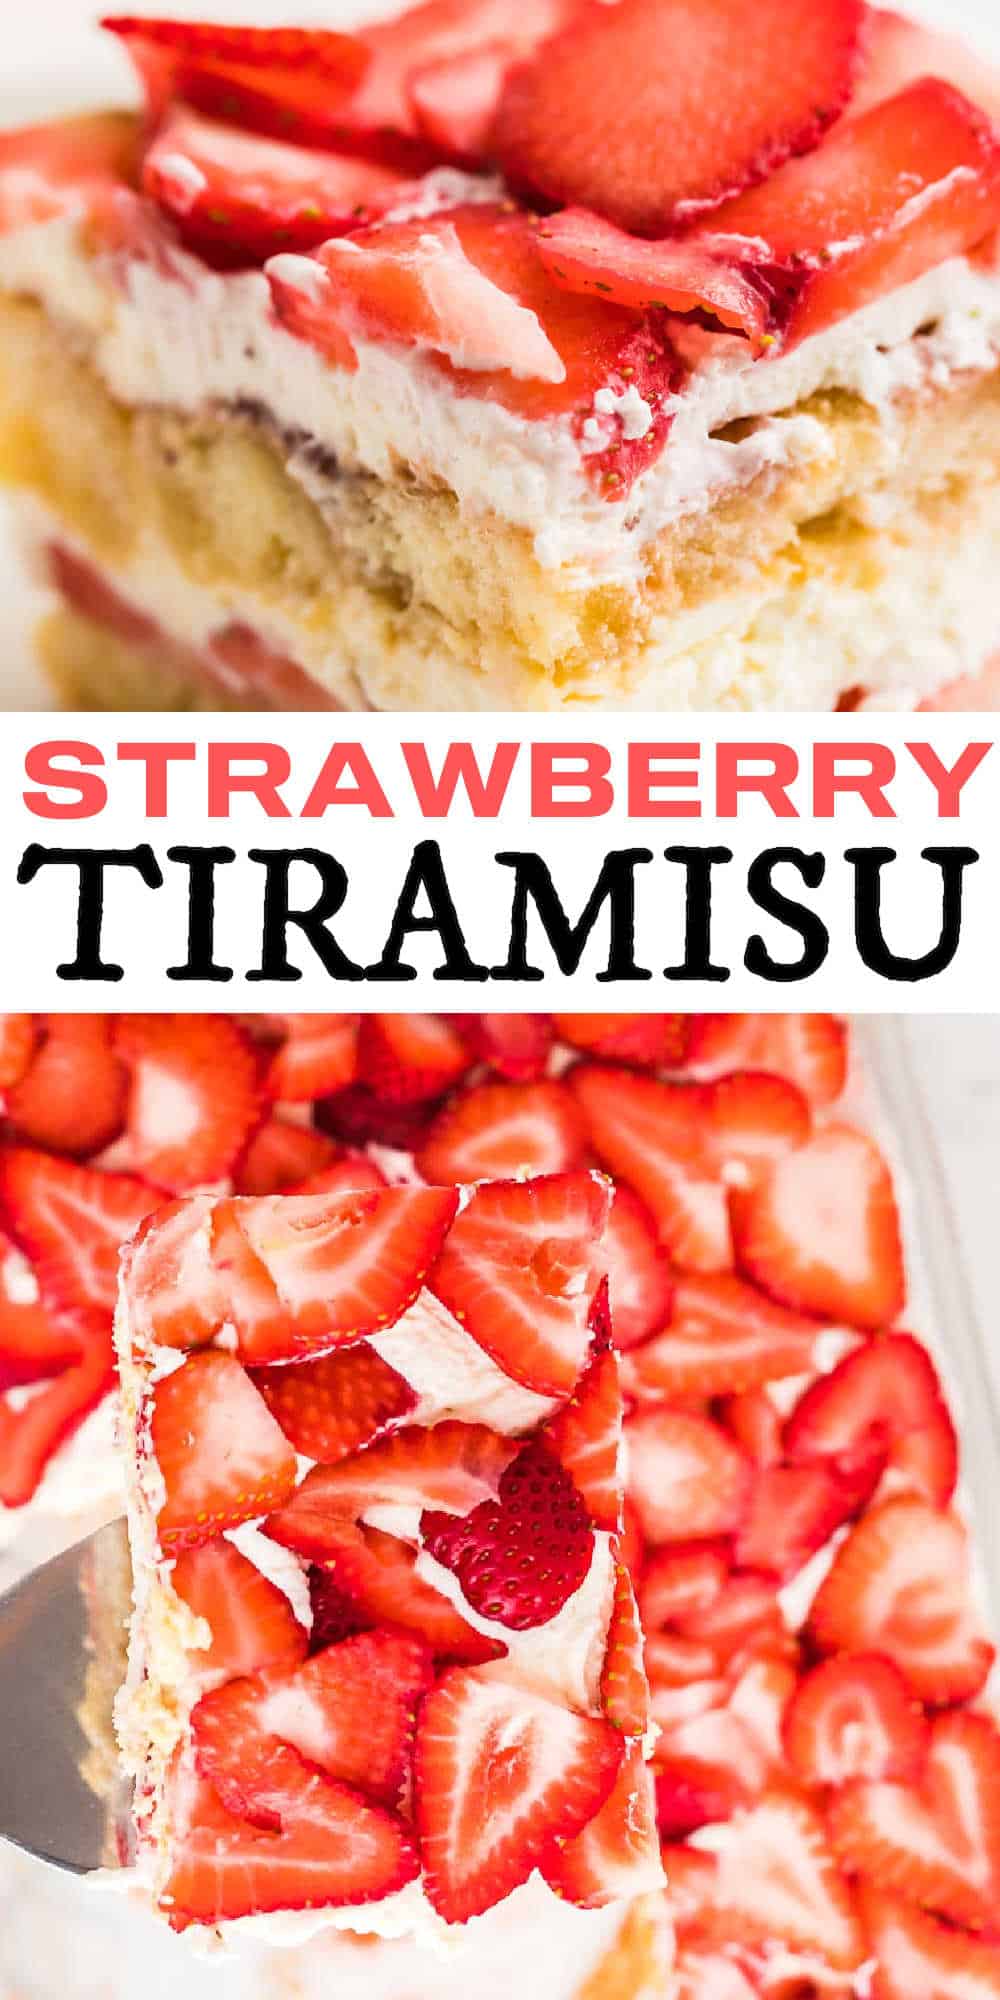 Strawberry Tiramisu has layers of fresh juicy, strawberries, rich delicious cream filling, and orange liqueur infused ladyfinger cookies. The Best No-Bake Strawberry Tiramisu | Easy Strawberry Tiramisu Recipe #cheerfulcook #tiramisu #strawberry #strawberrytiramisu #nobake #dessert via @cheerfulcook